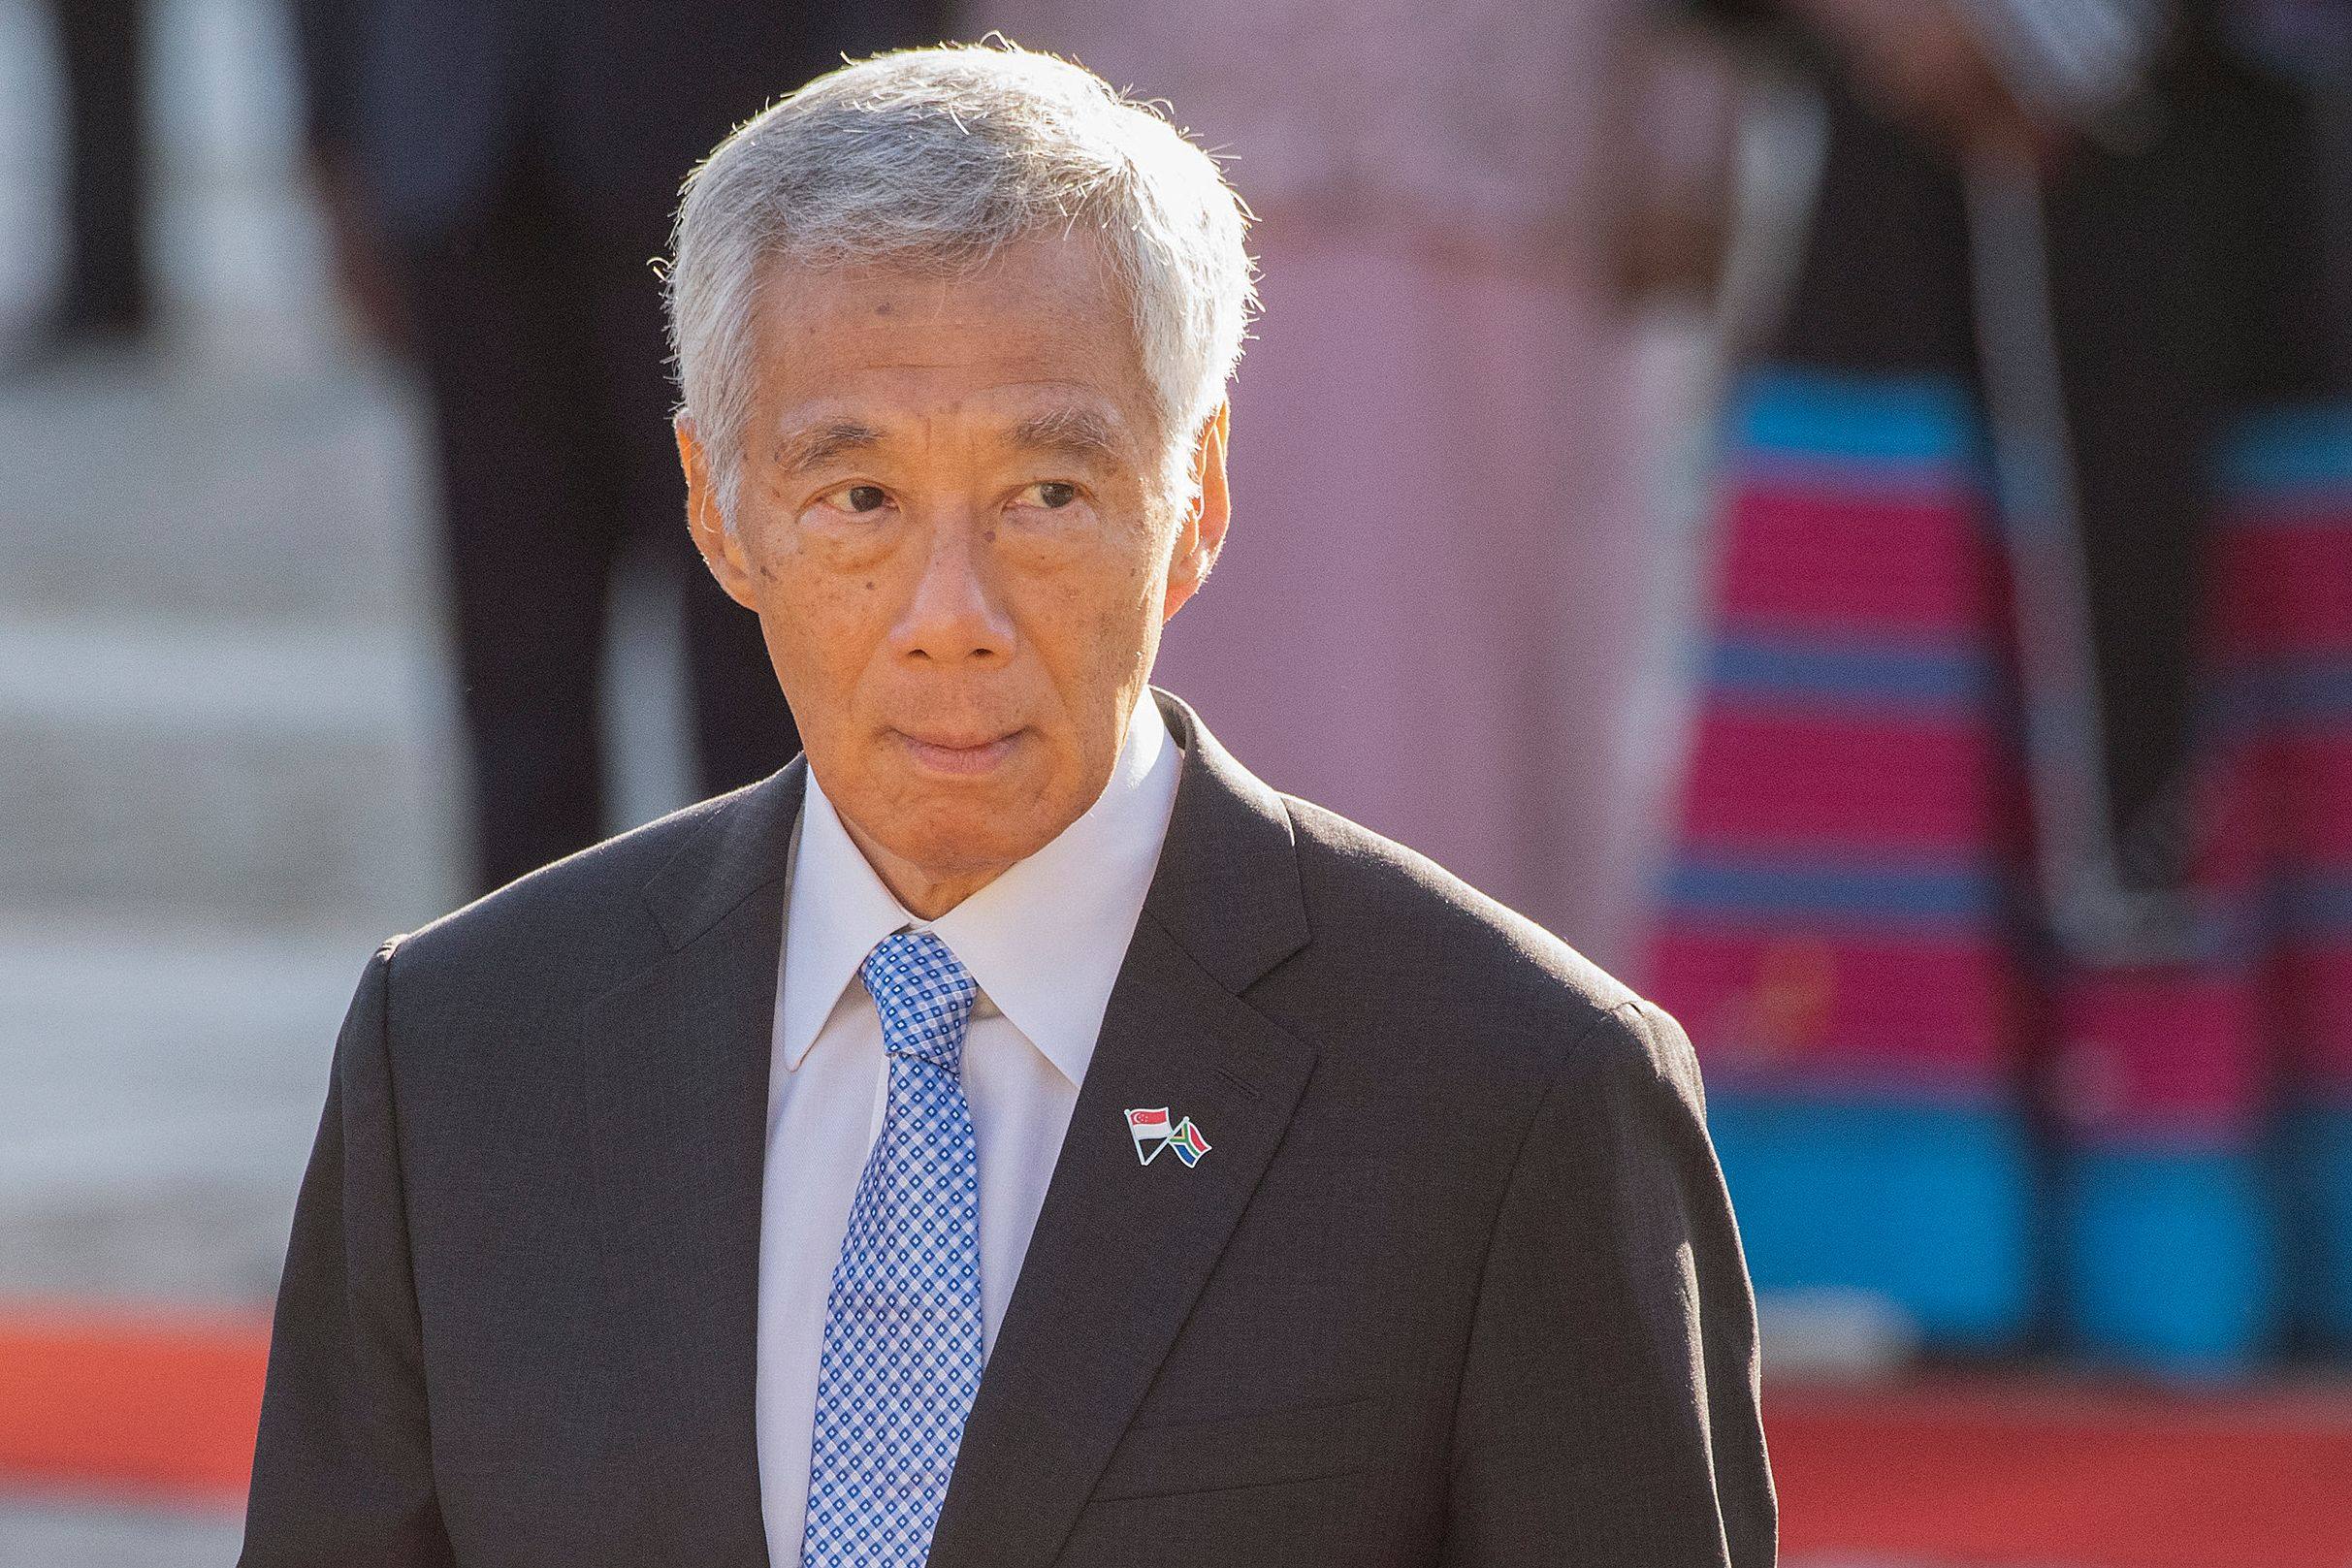 Singapore’s Prime Minister Lee Hsien Loong during his visit at the South African Parliament in Cape Town on May 16, 2023. Photo: AFP